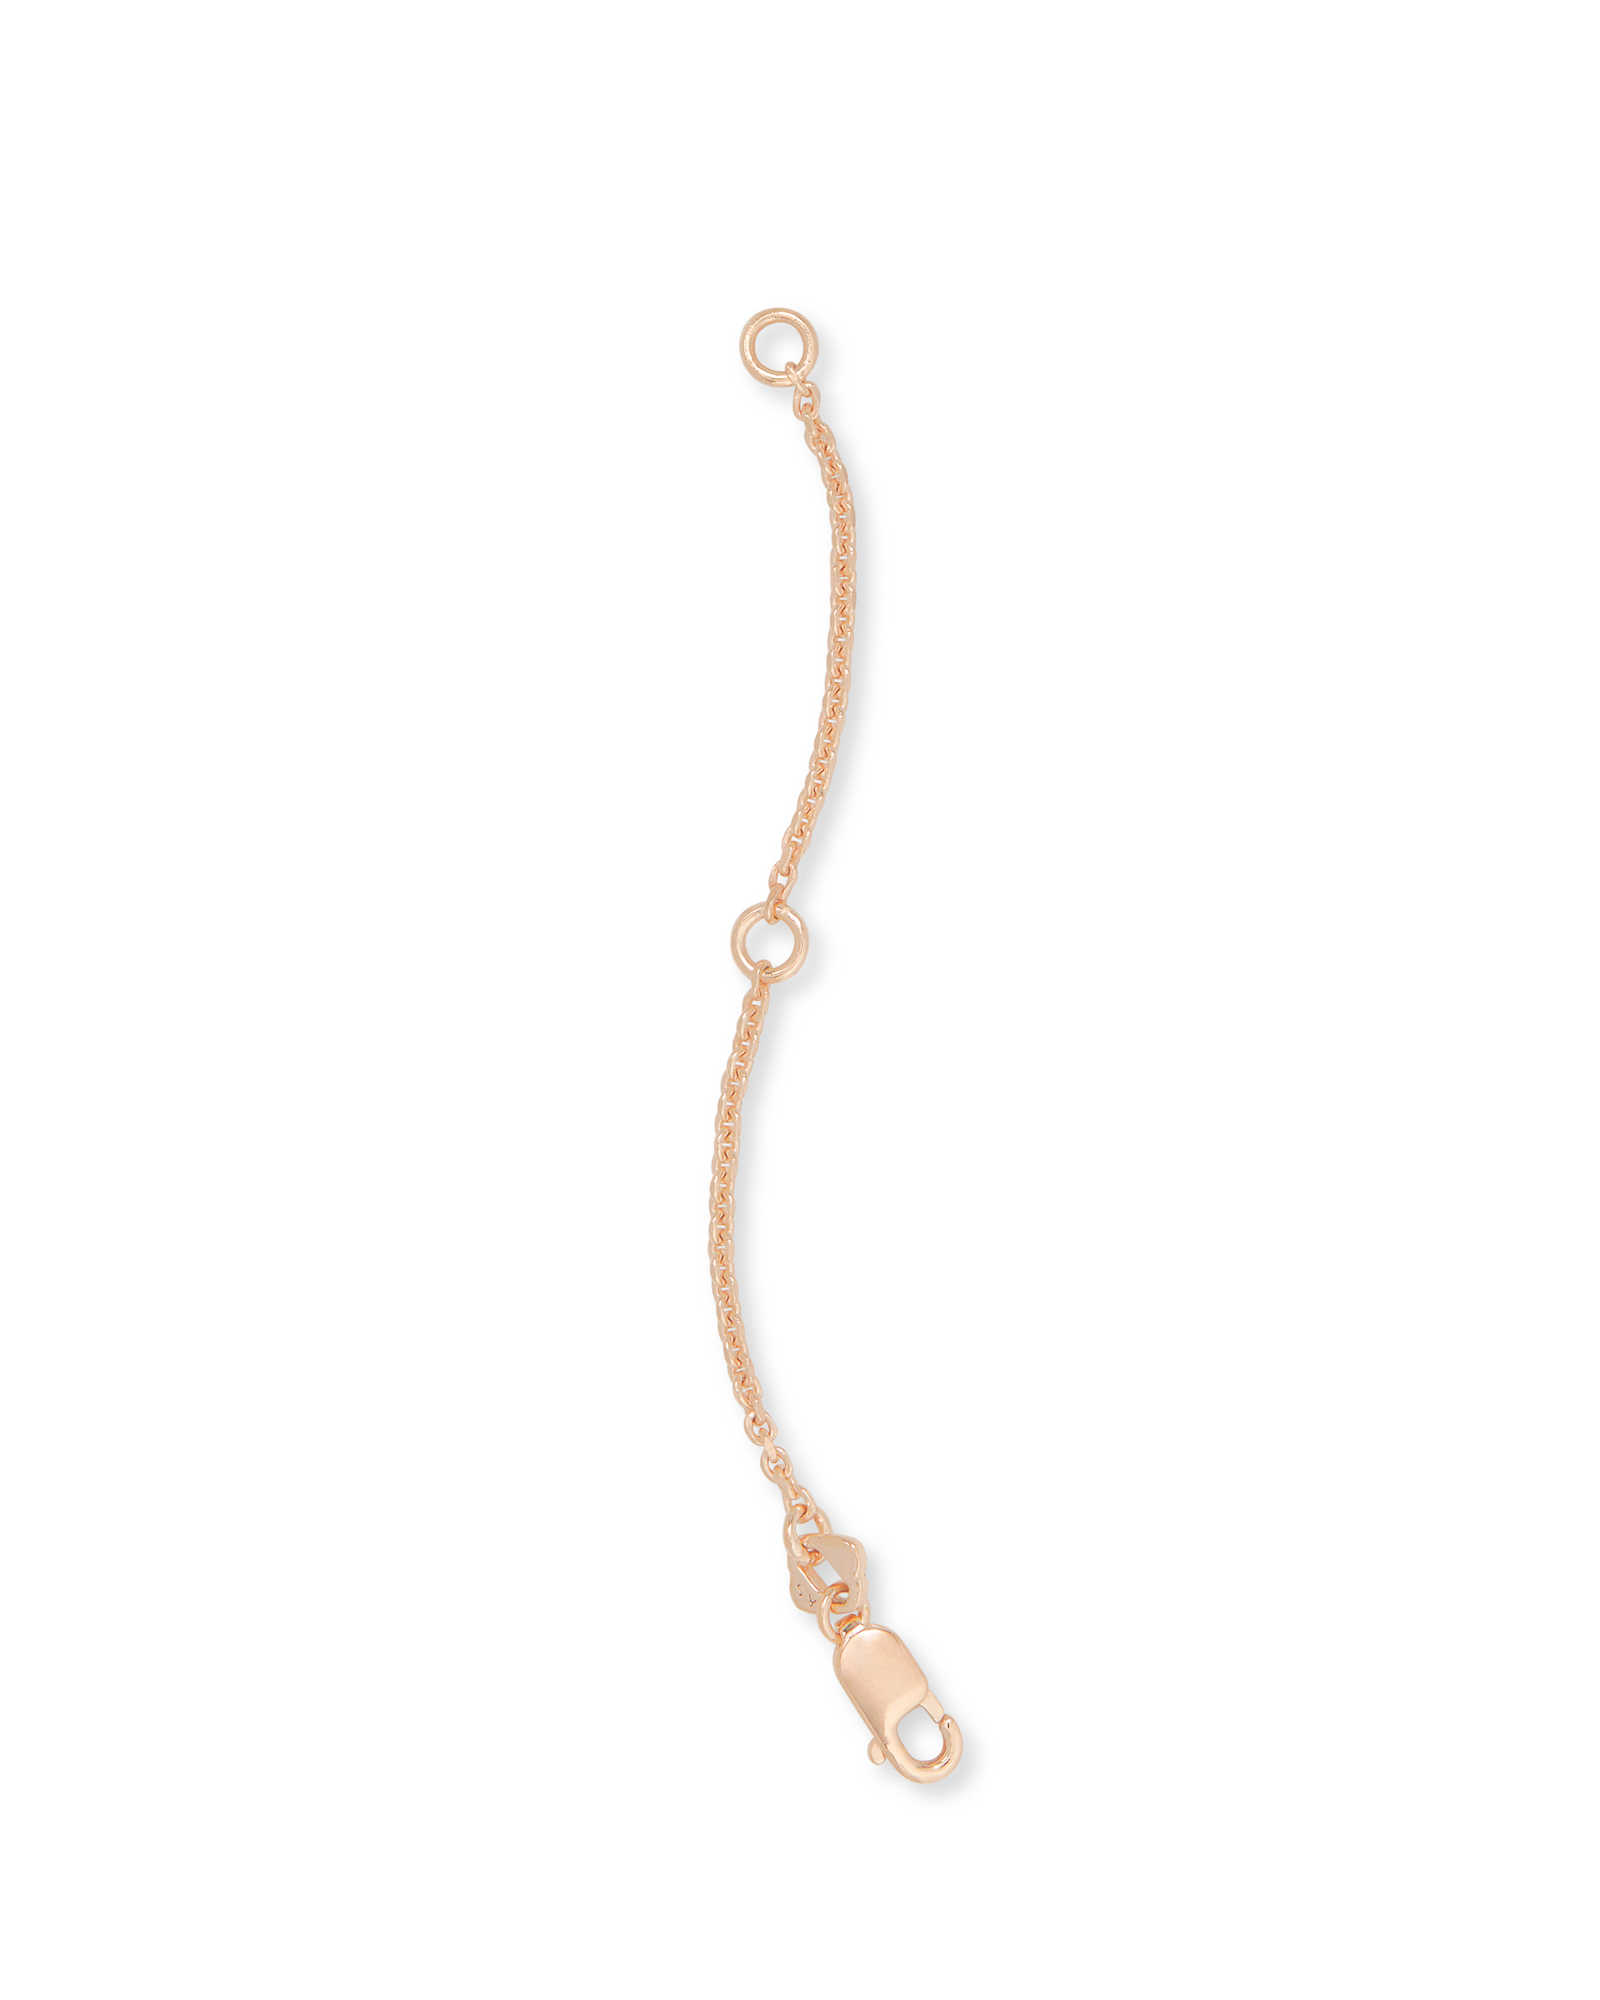 GetUSCart- 925 Sterling Silver Necklace Extender Rose Gold Necklace Extender  Rose Gold Chain Extenders for Necklaces 2, 3, 4 Inches